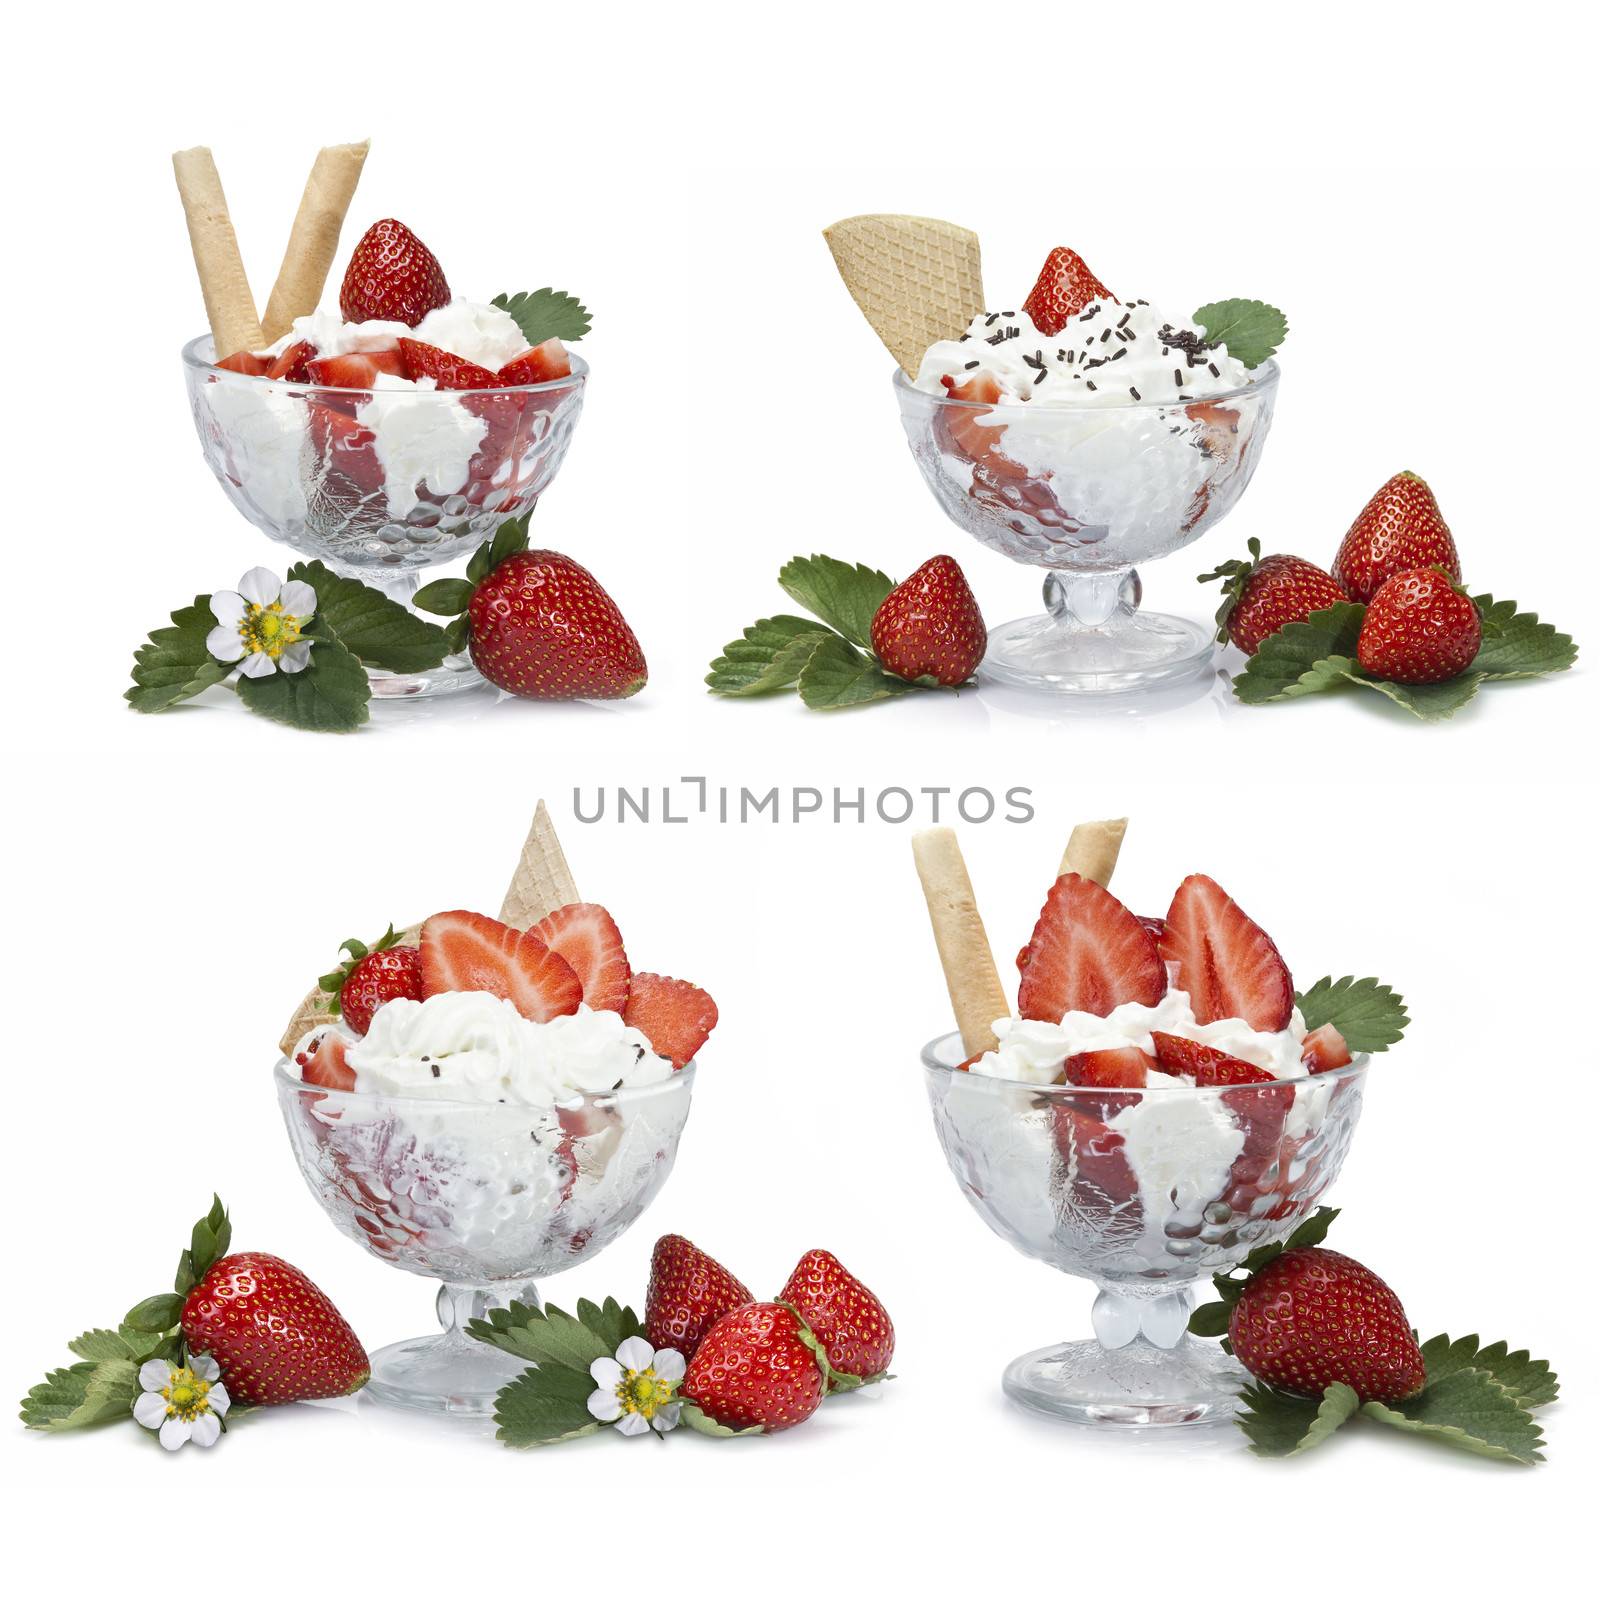 Strawberries with cream by angelsimon